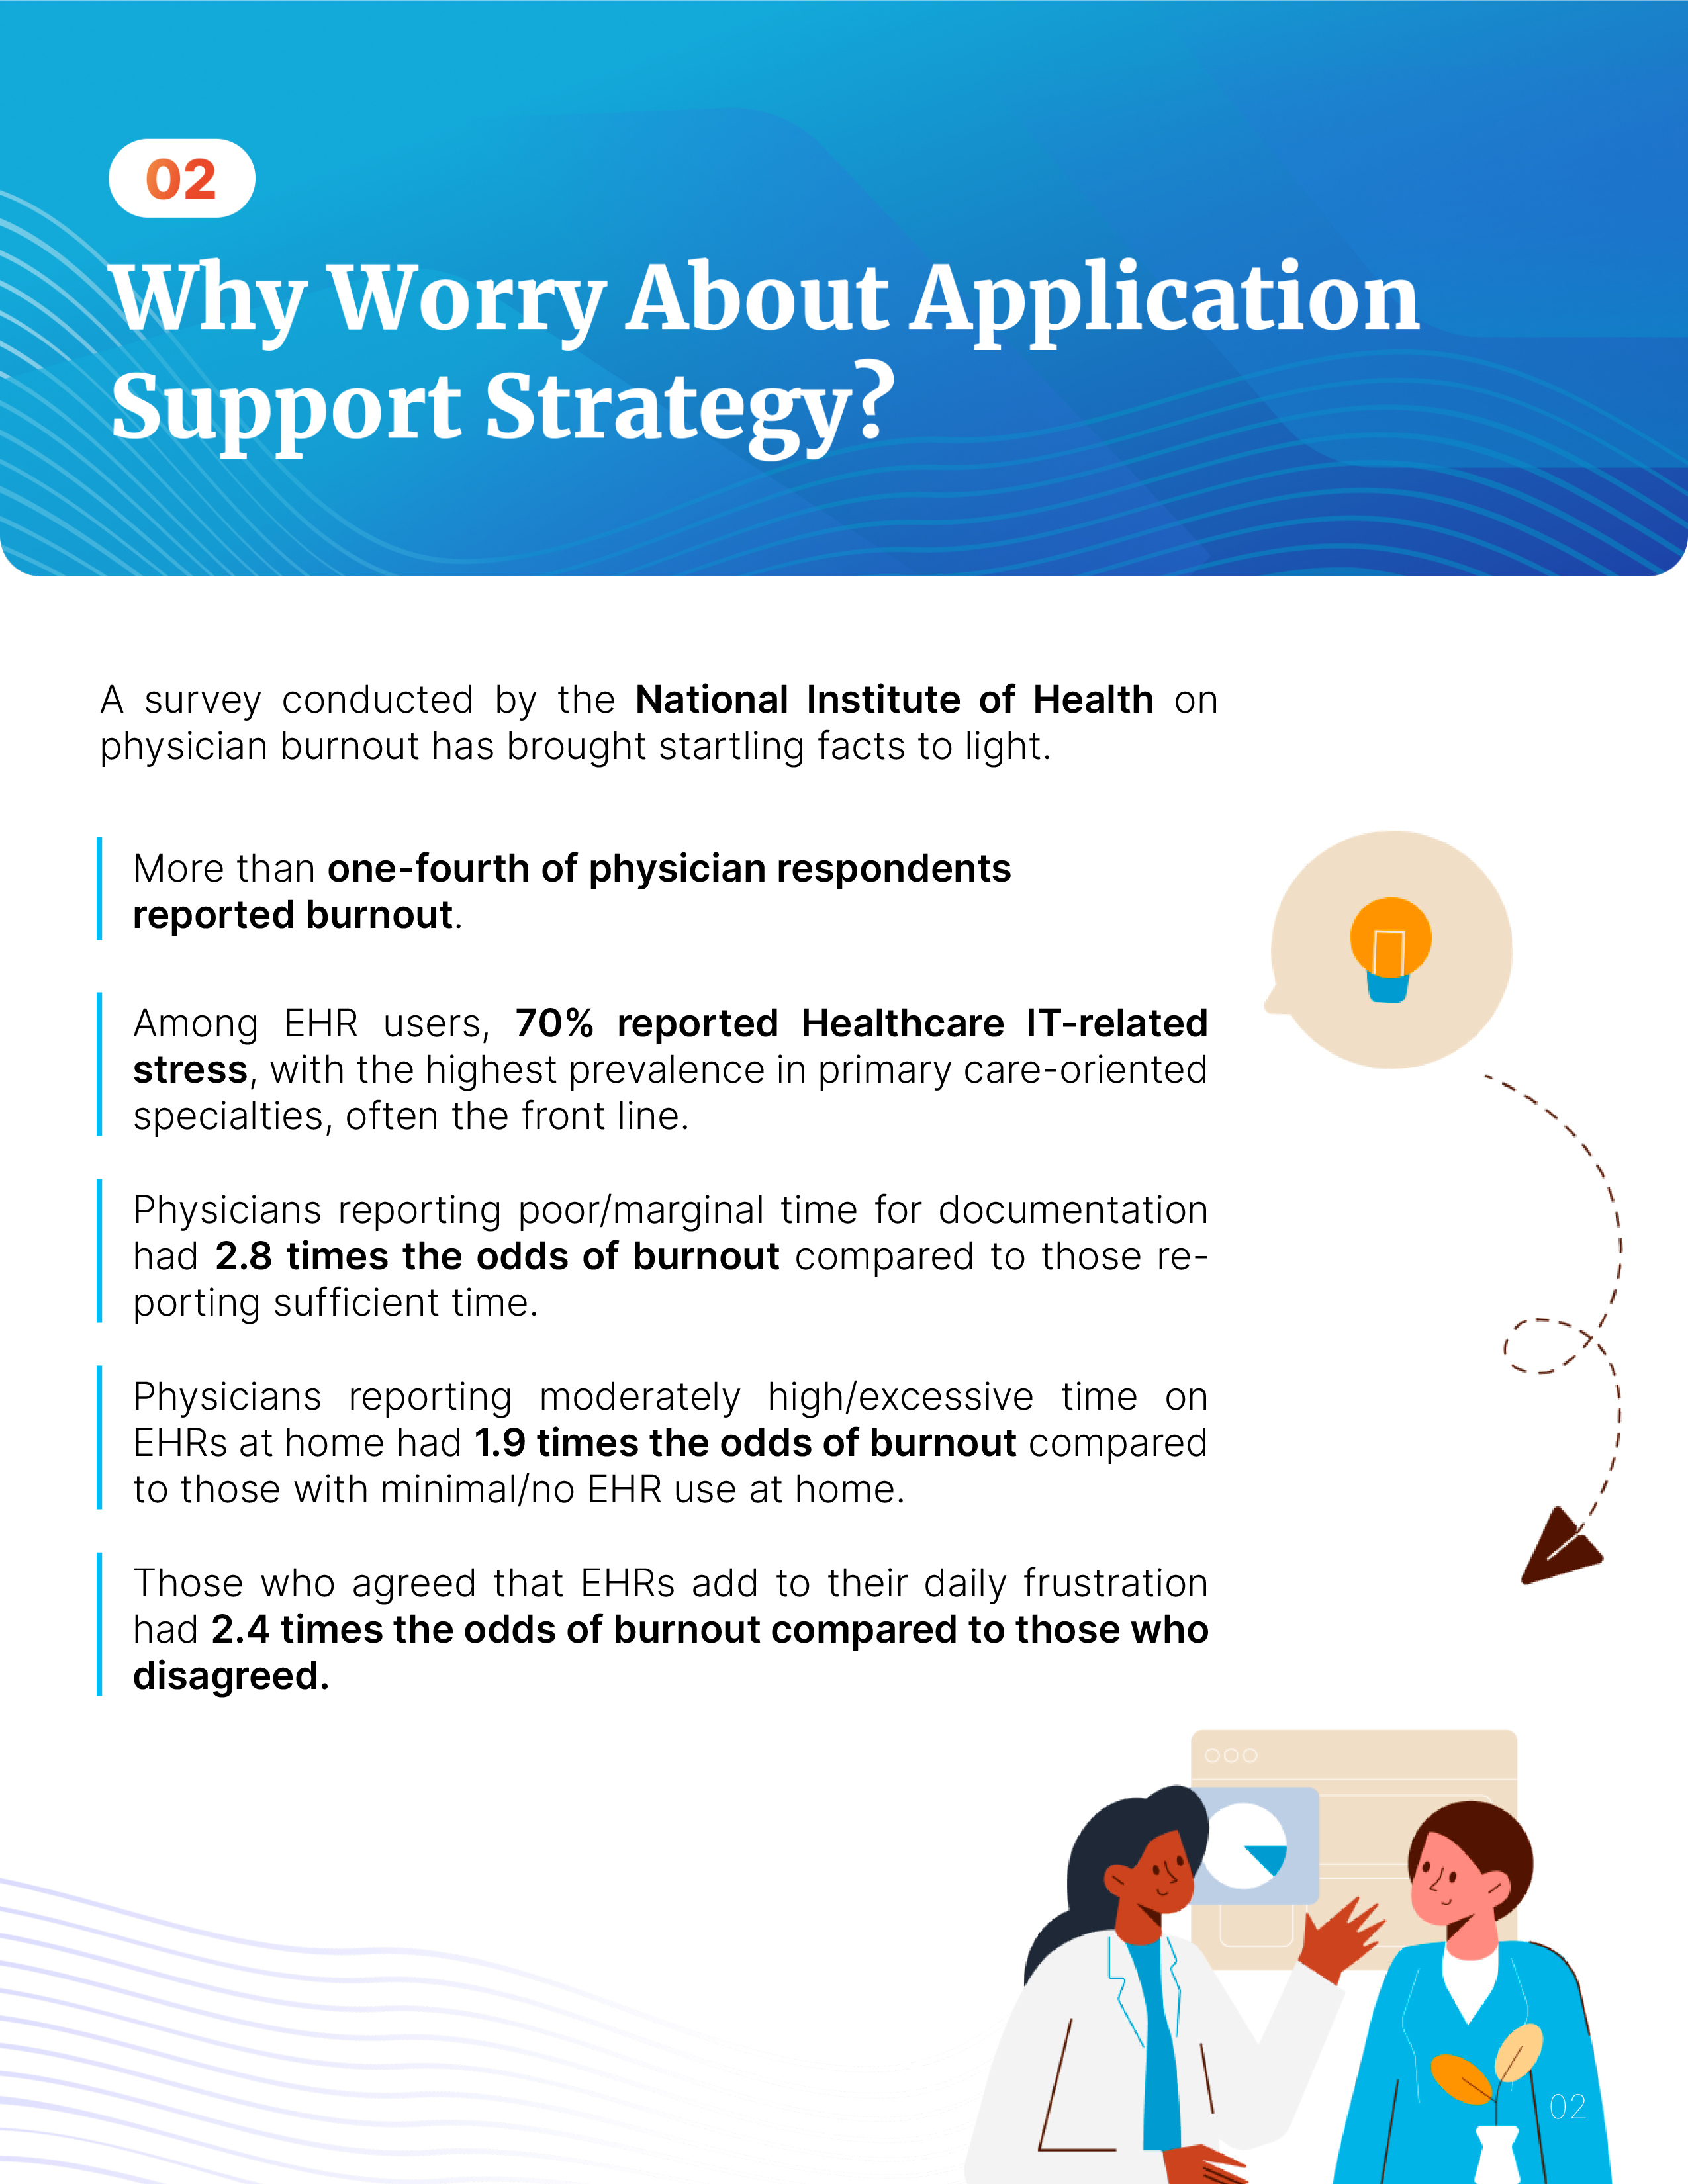 Why Worry About Application Support Strategy